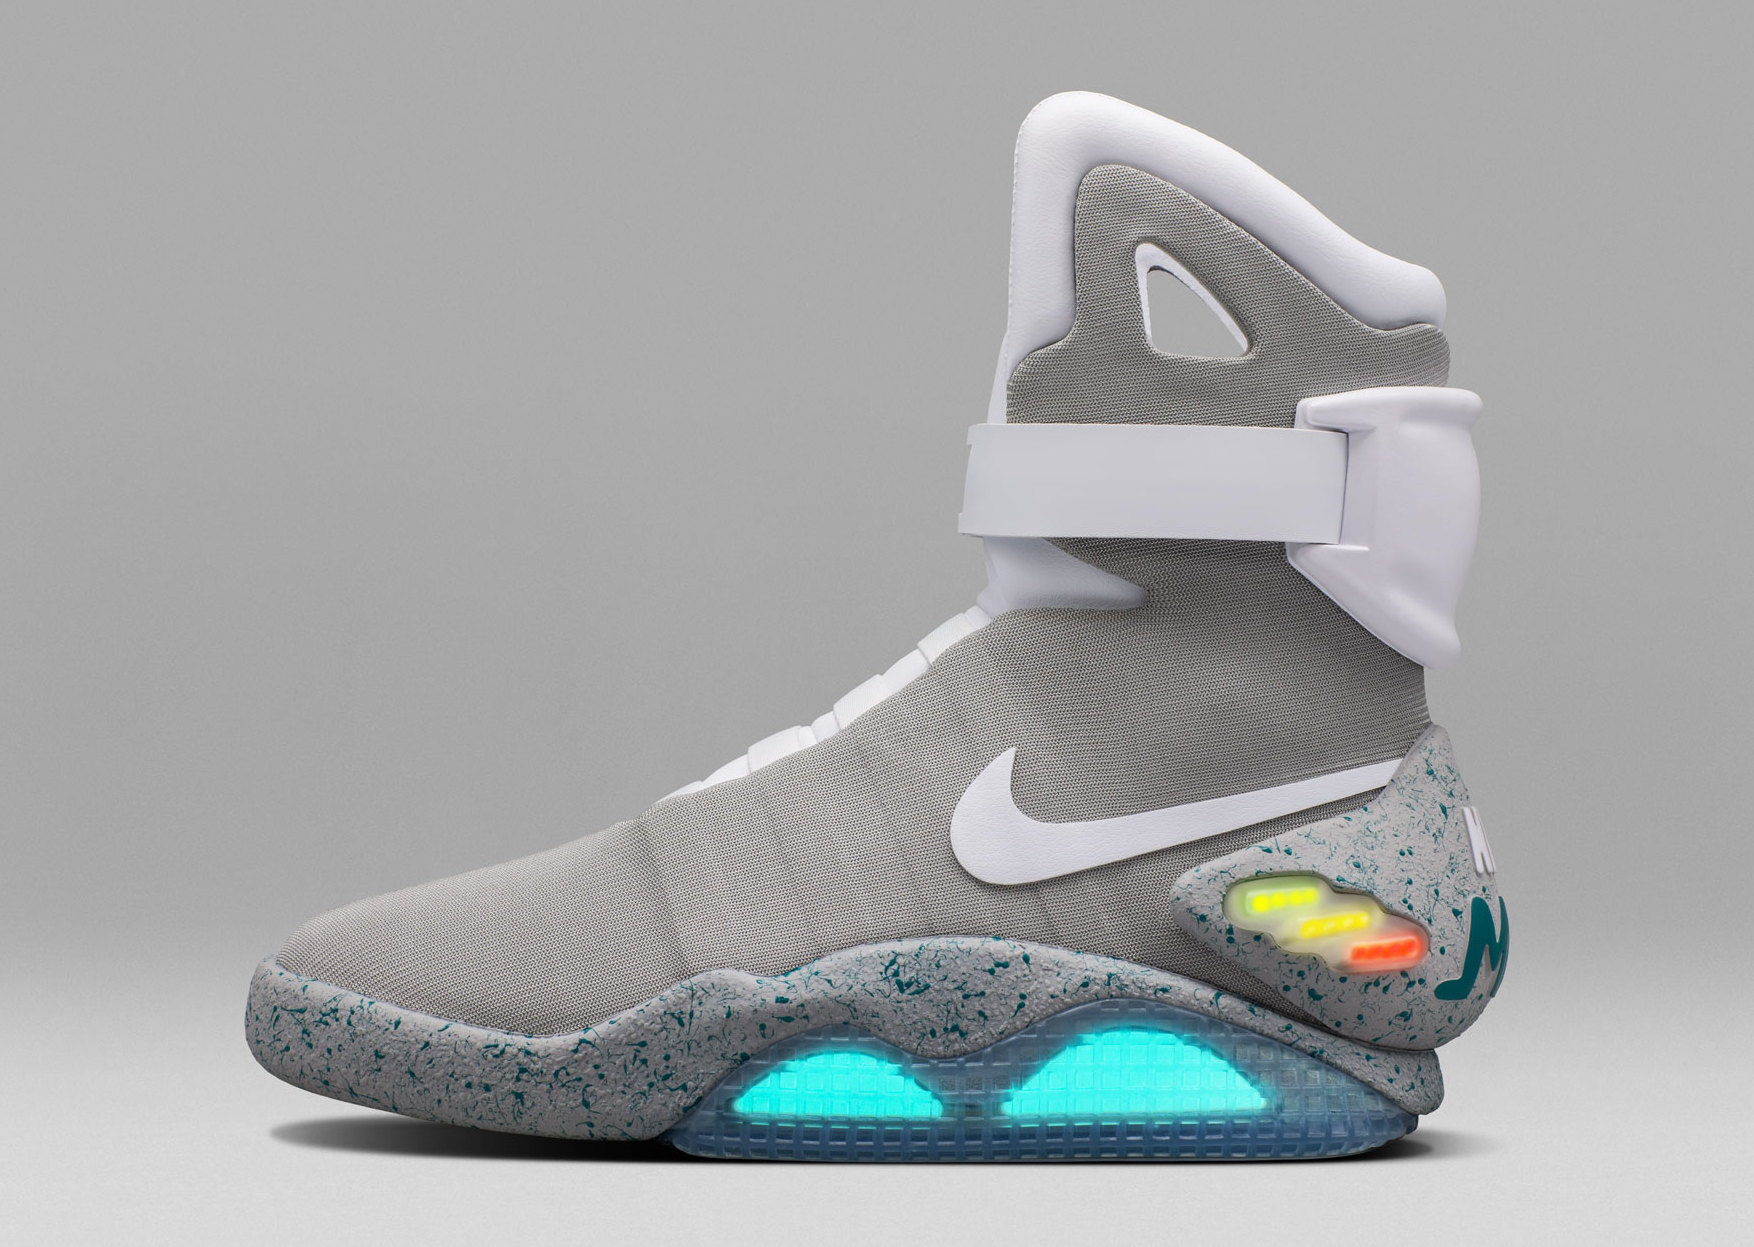 paridad Bourgeon Confesión The Complete Nike Mag Price Guide | Complex